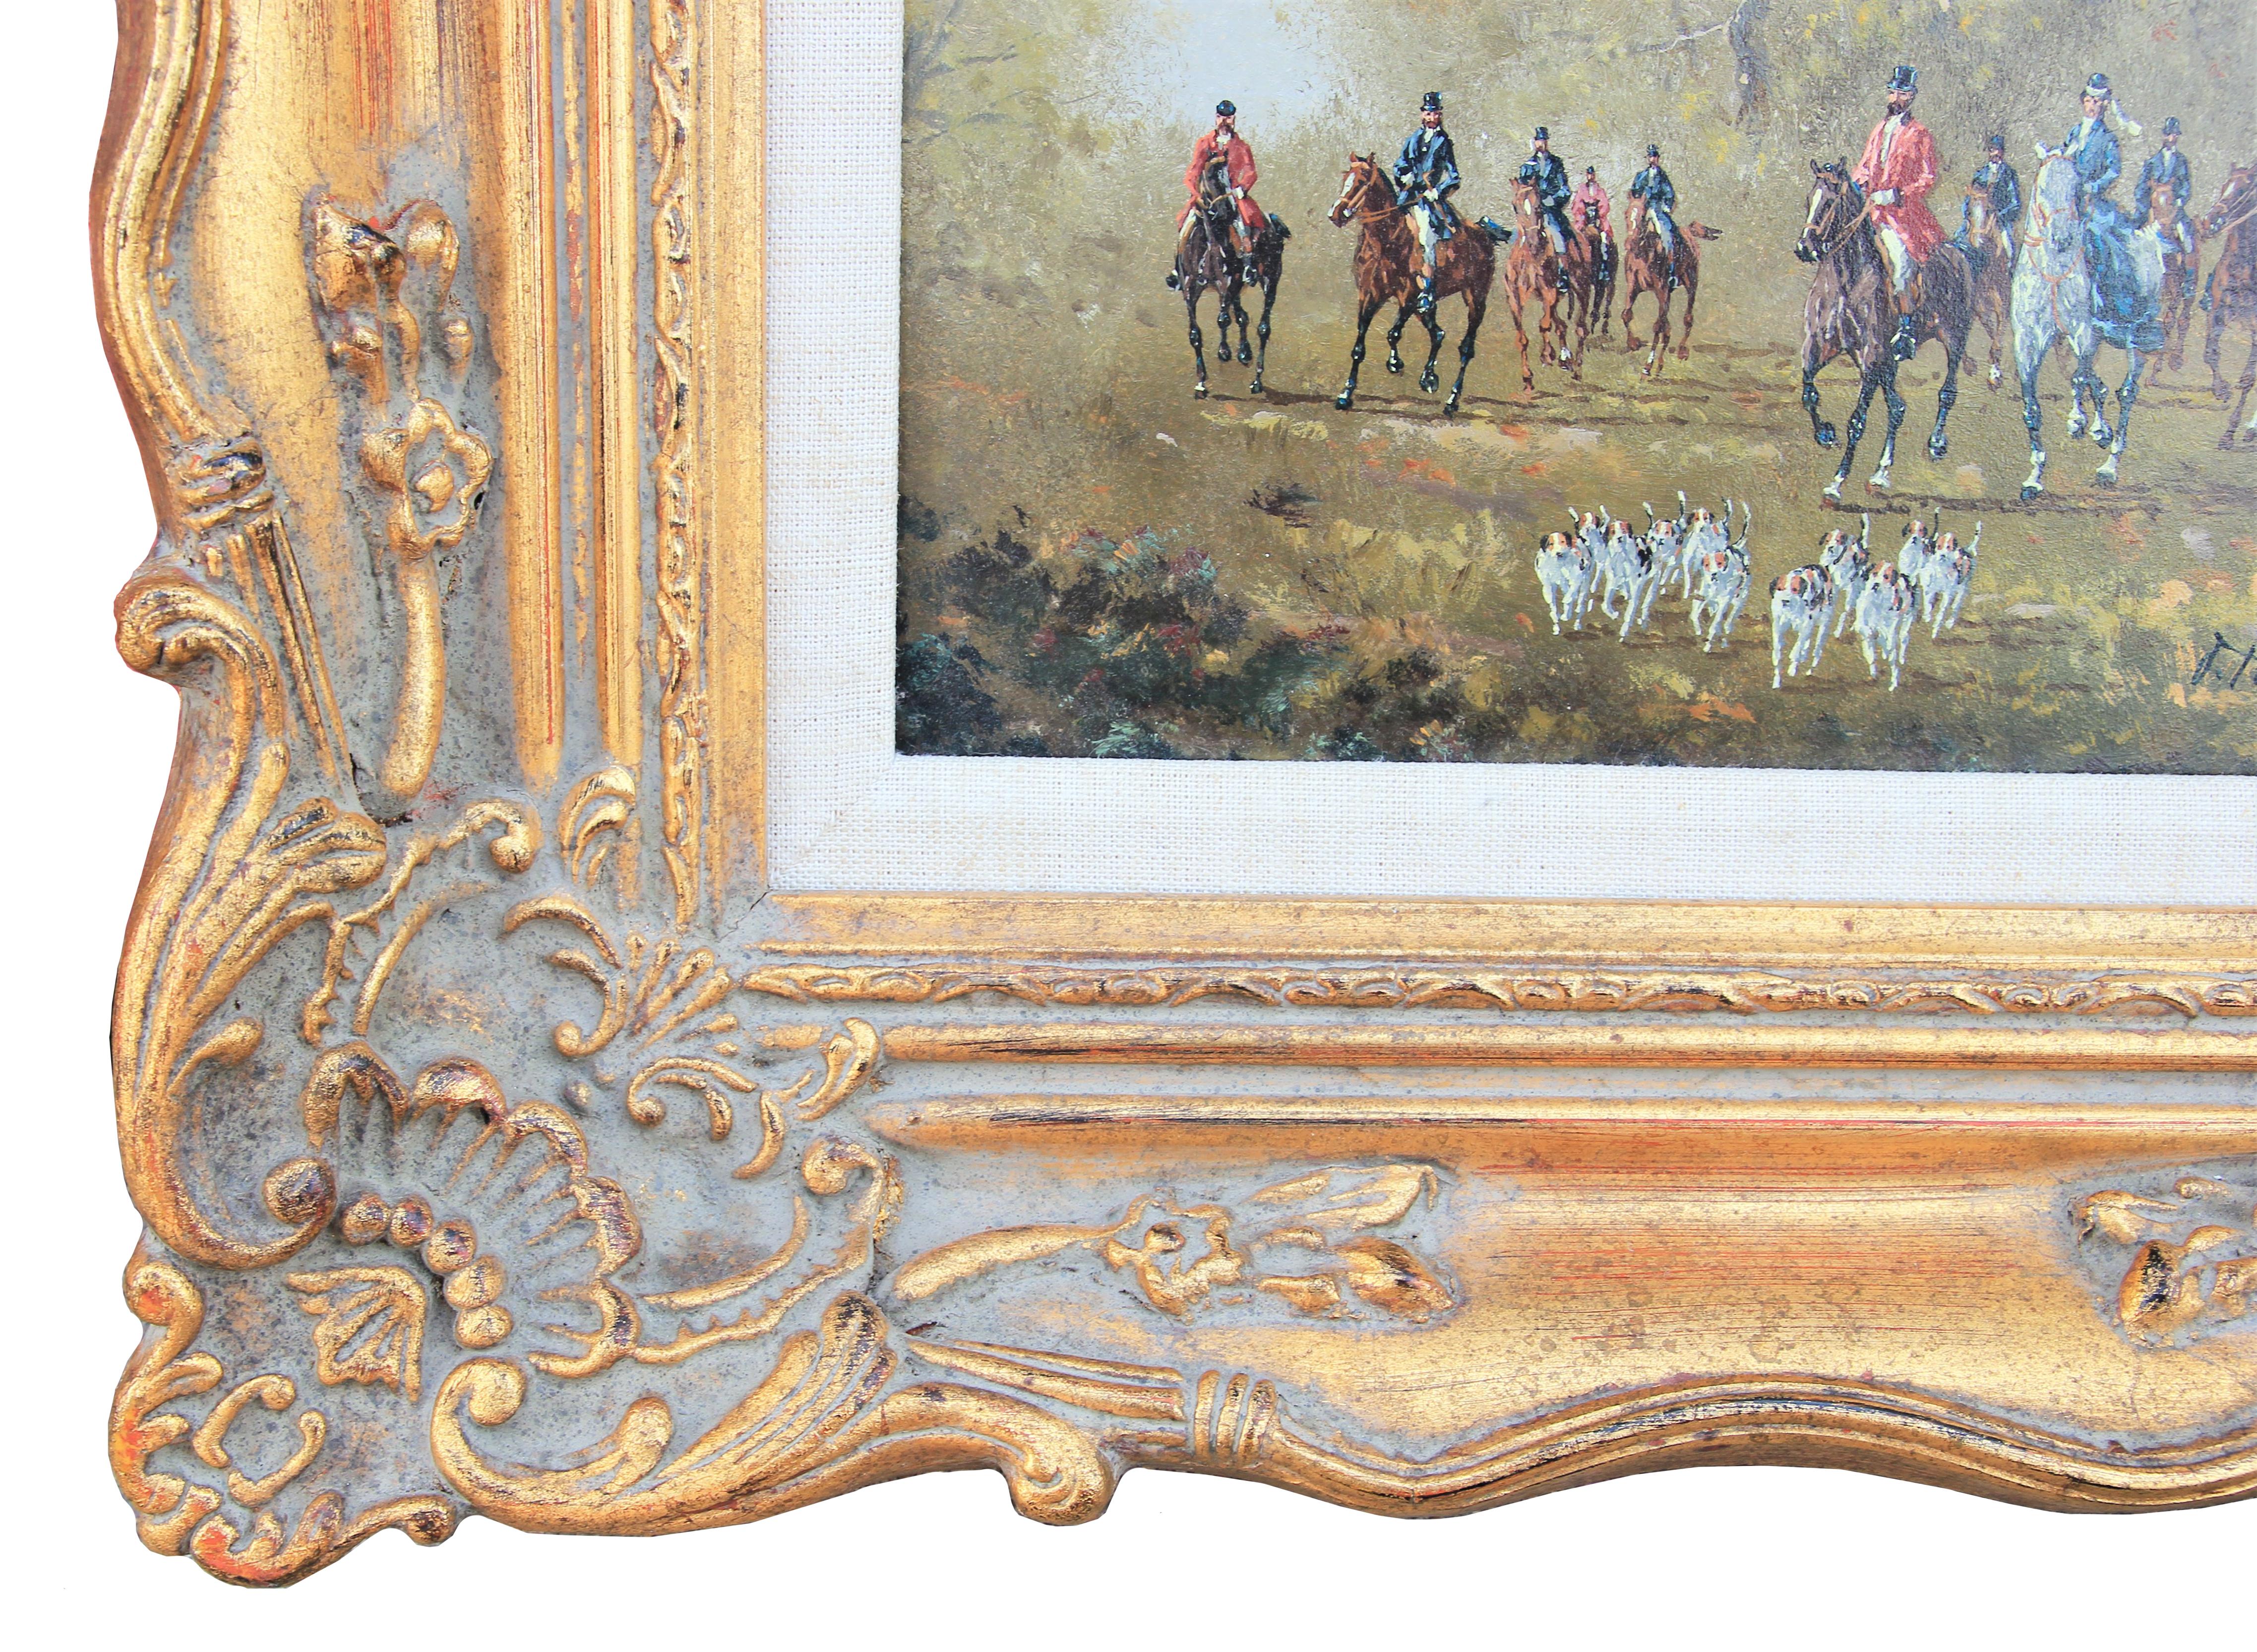 Naturalistic Figurative Landscape Painting of a Mounted Hunting Party with Dogs 1